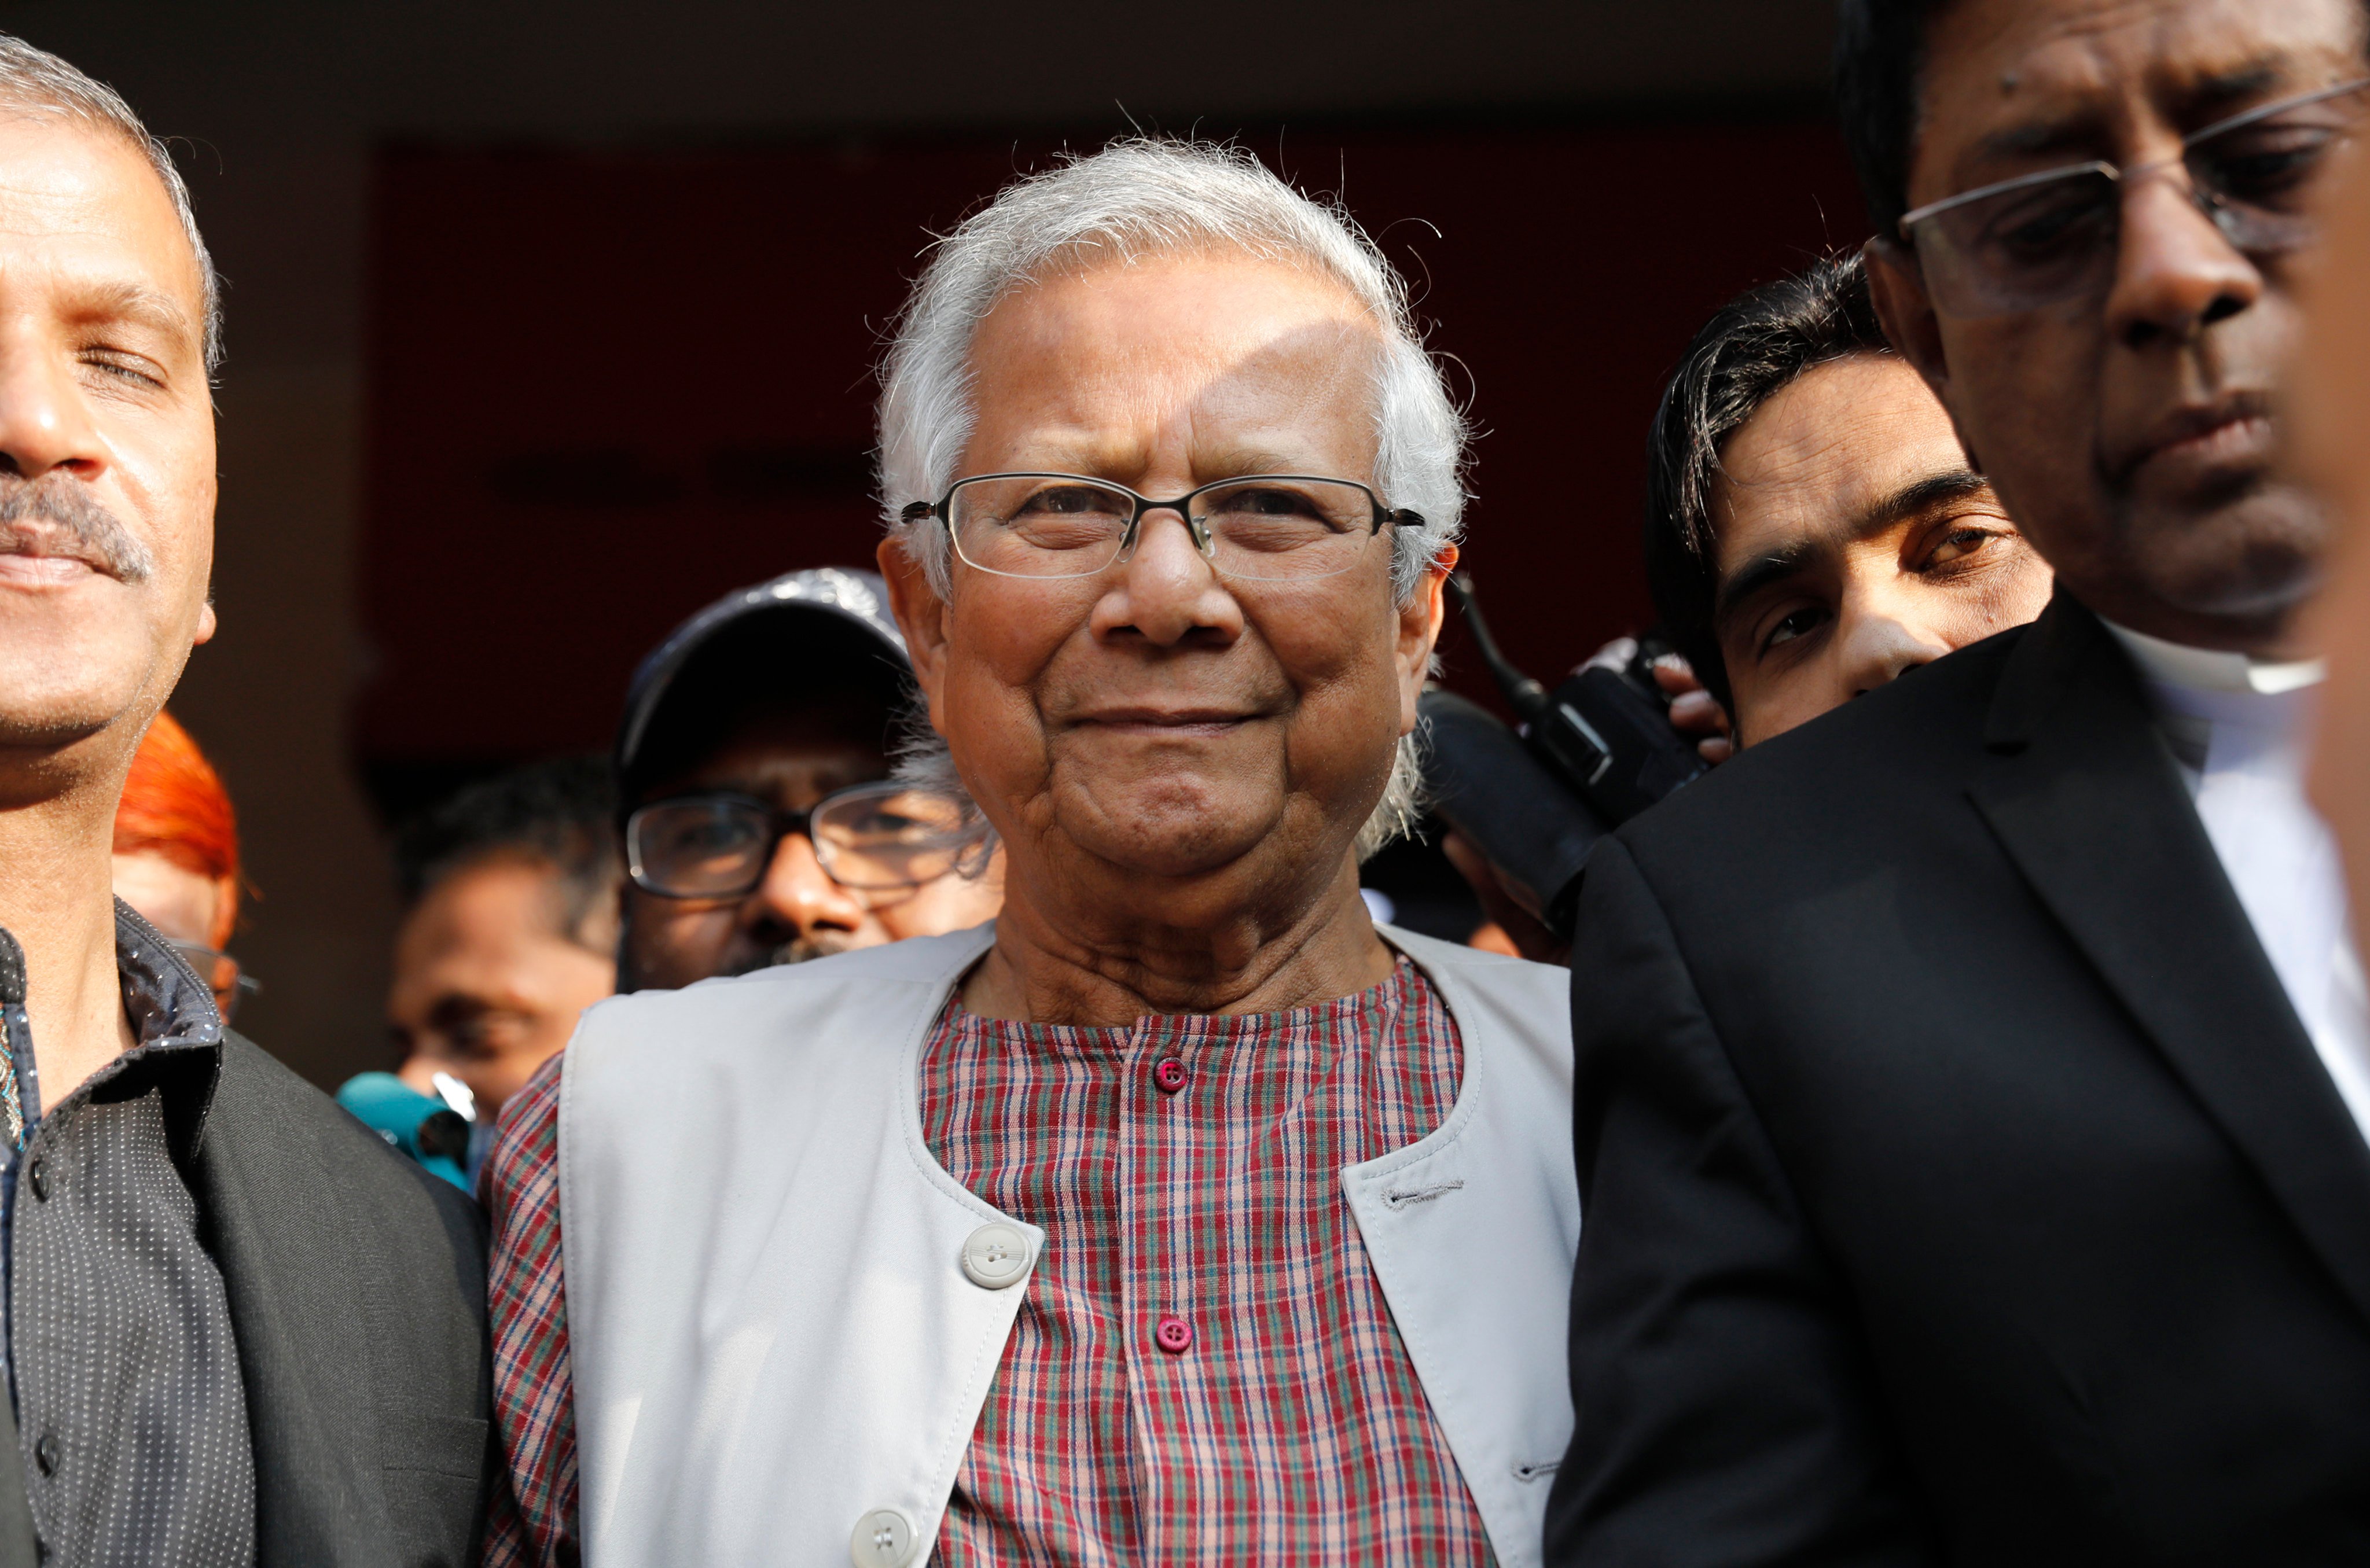 Nobel Peace Prize winner Muhammad Yunus comes out after a labor court sentenced him to 6 months in jail for labor law violations in Dhaka, Bangladesh on Monday. Photo: AP